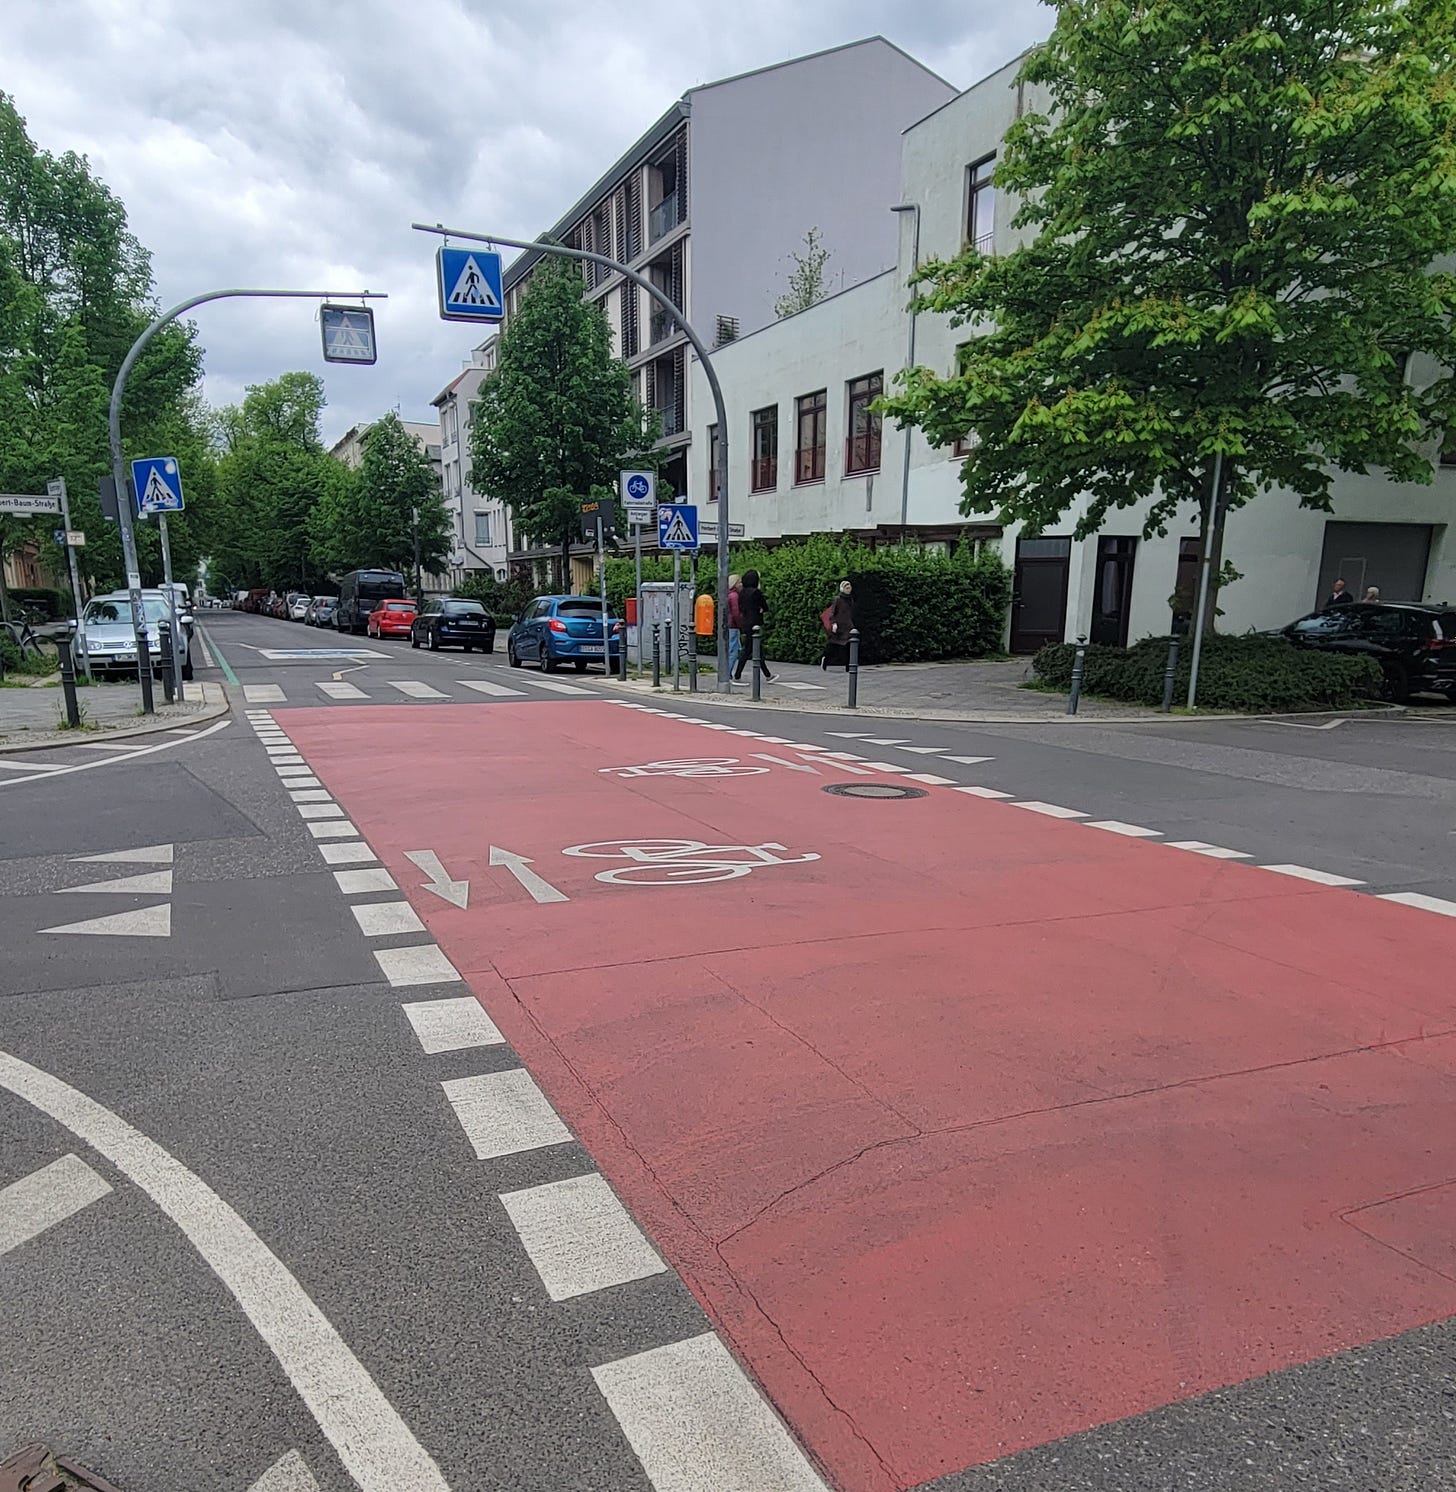 Street with painted markings signifying it is for use by bikes only. The bike street has red-painted pavement with white highlights marking the direction of travel. Blue signs hanging over the street warn of a pedestrian crossing ahead.